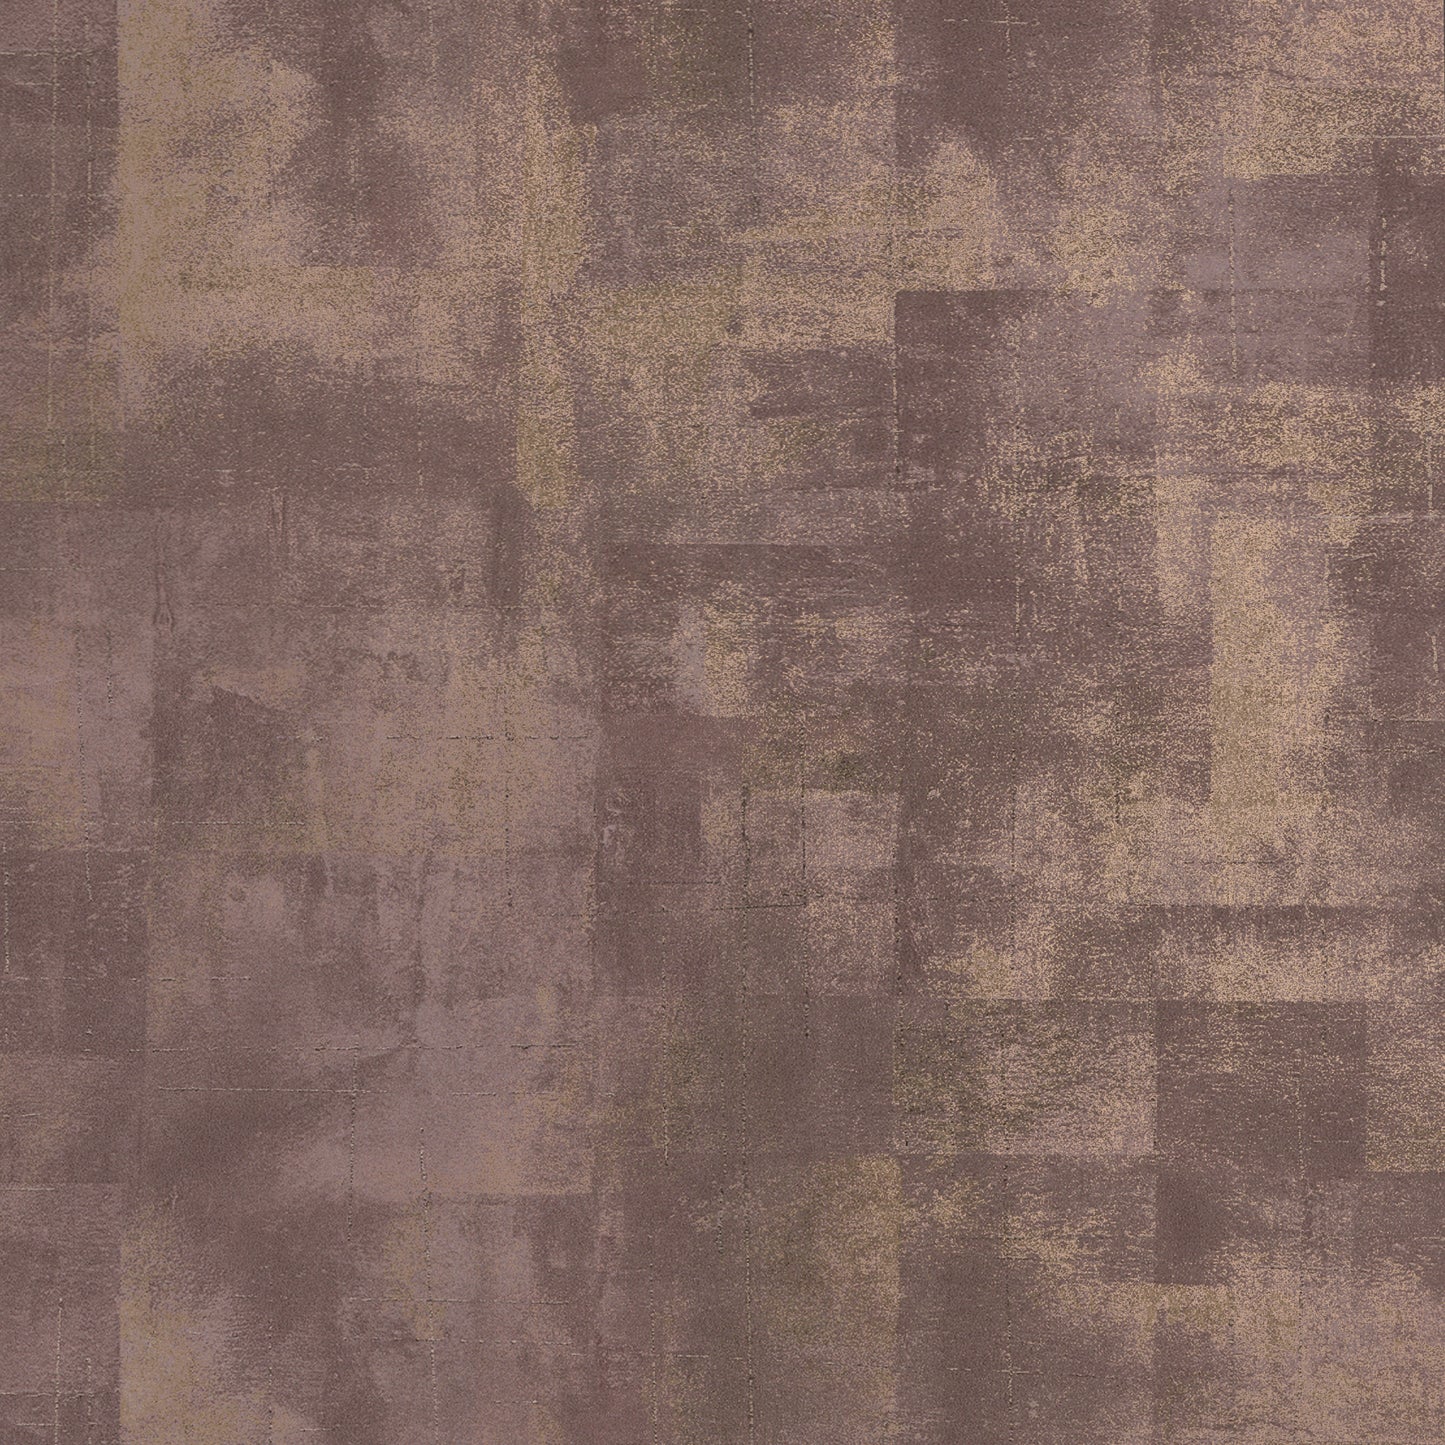 Acquire 2927-20407 Polished Ozone Brown Texture Brown Brewster Wallpaper